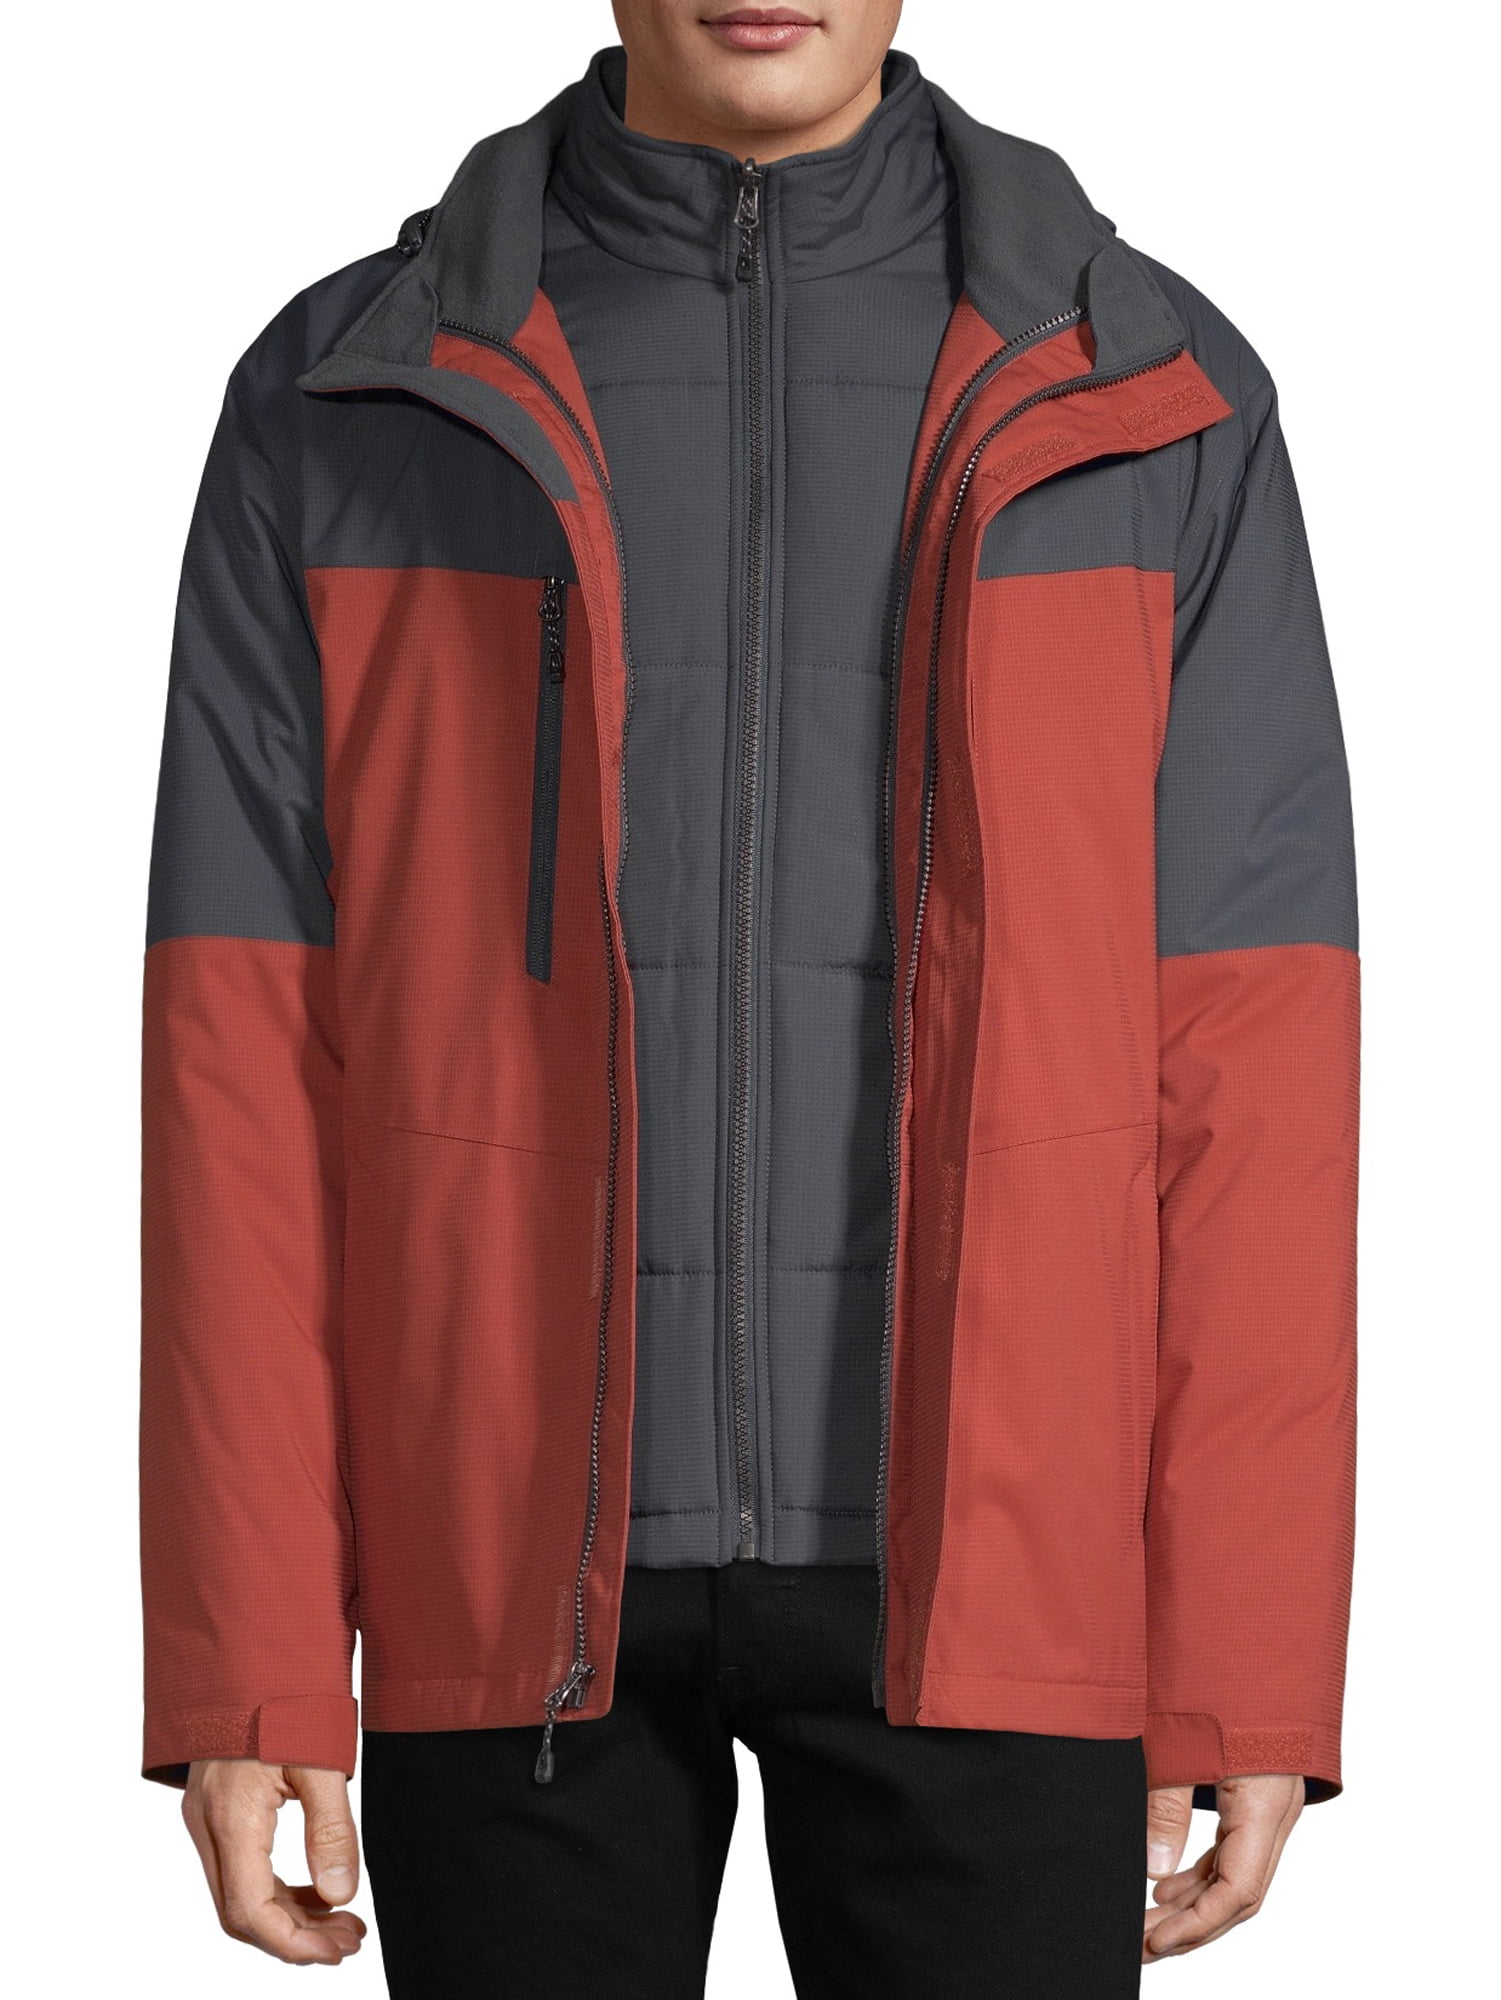 SwissTech Men's and Big Men's 3-in-1 Systems Jacket, up to Size 5XL -  Walmart.com